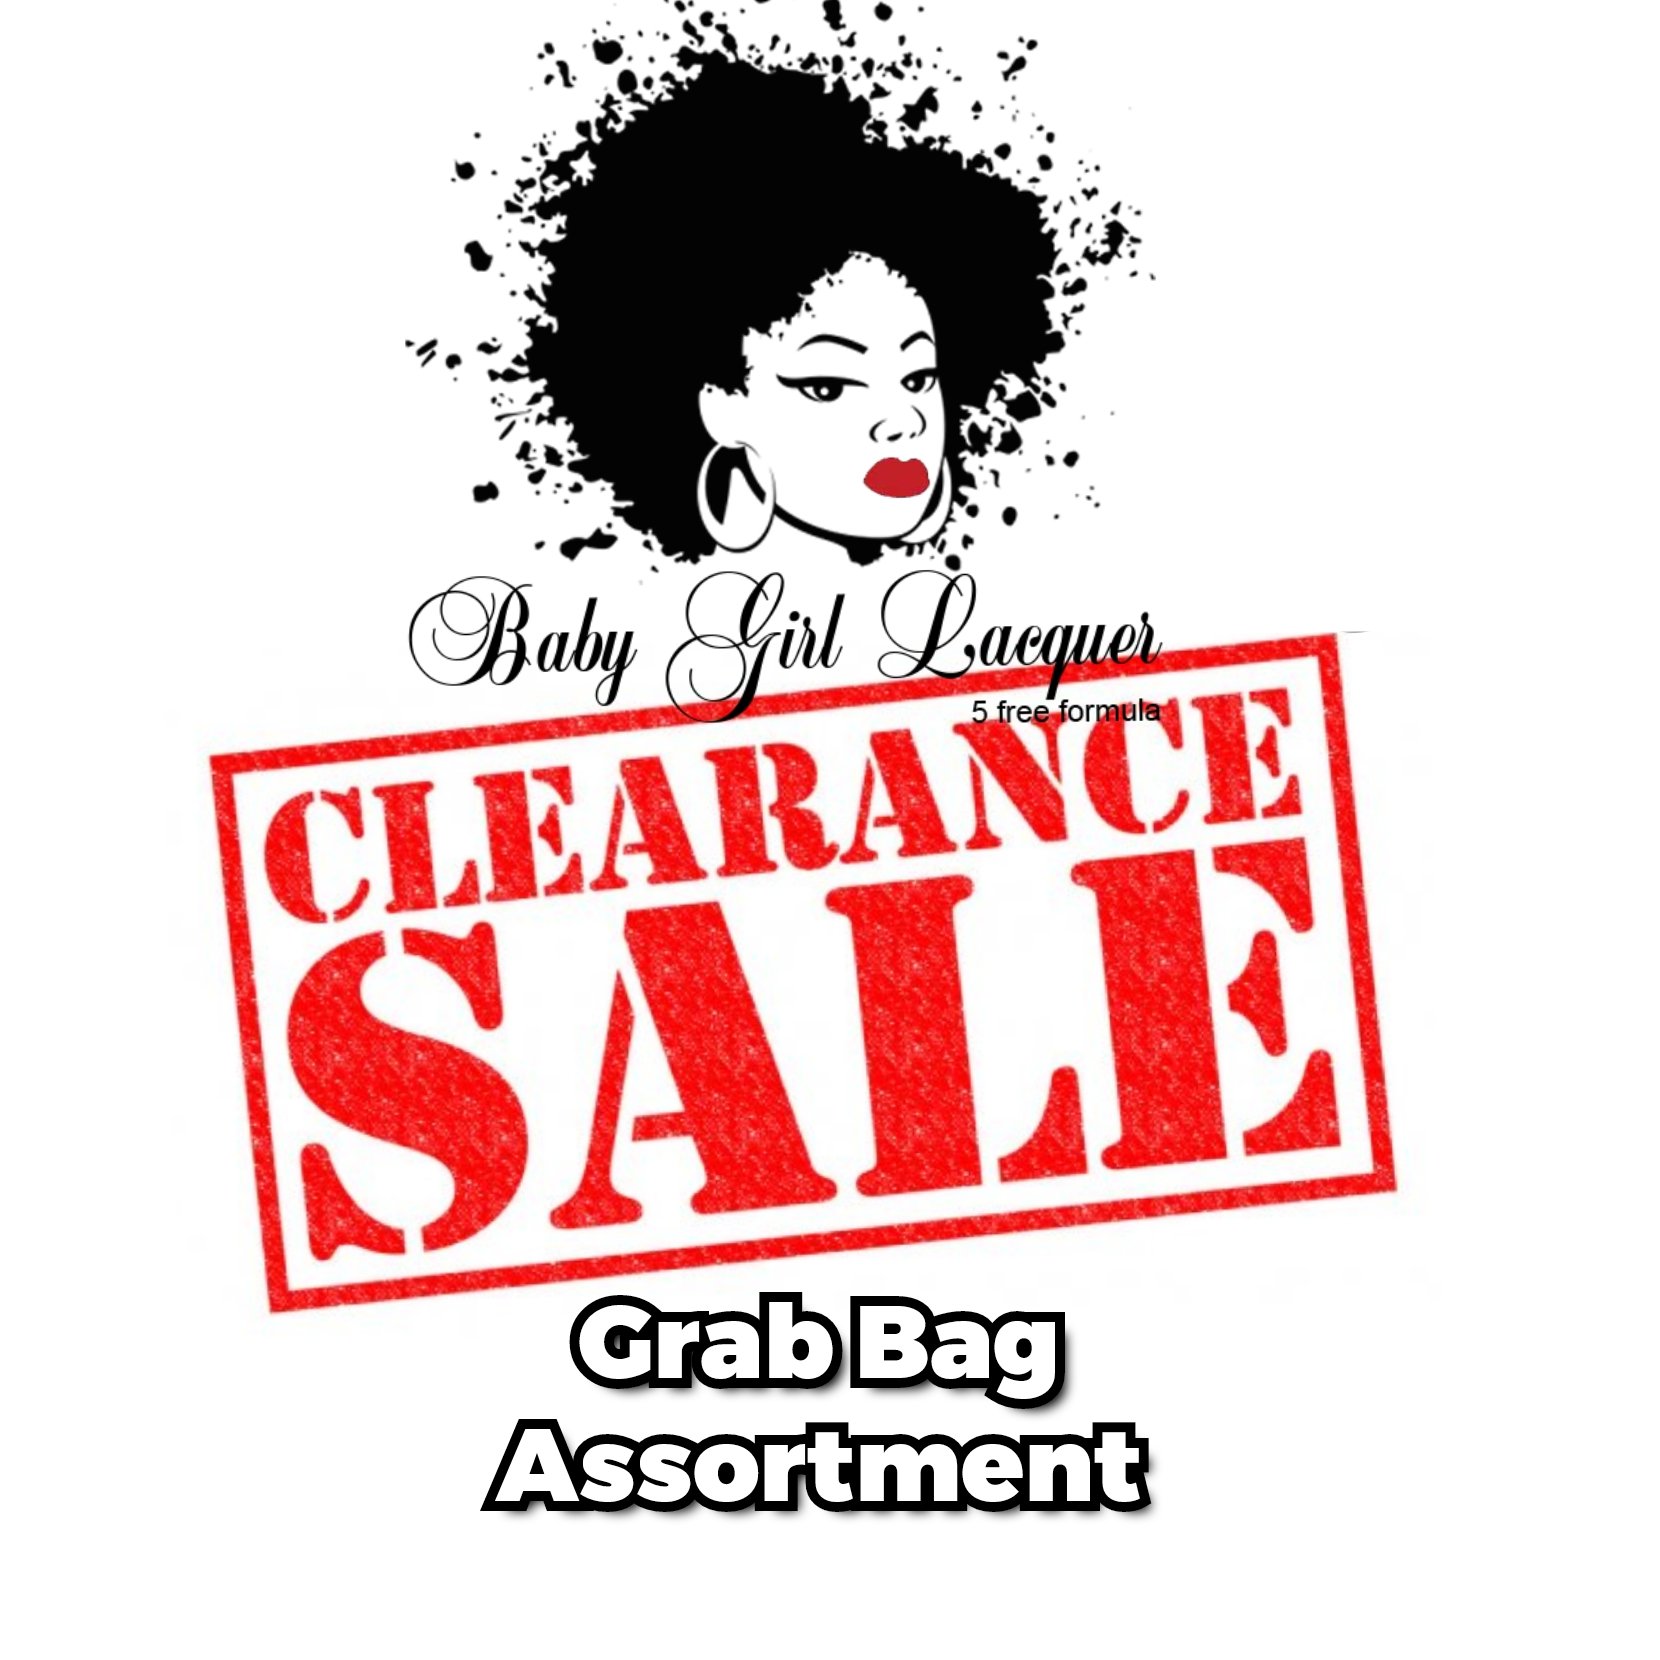 Assorted Grab Bags! [Clearance]